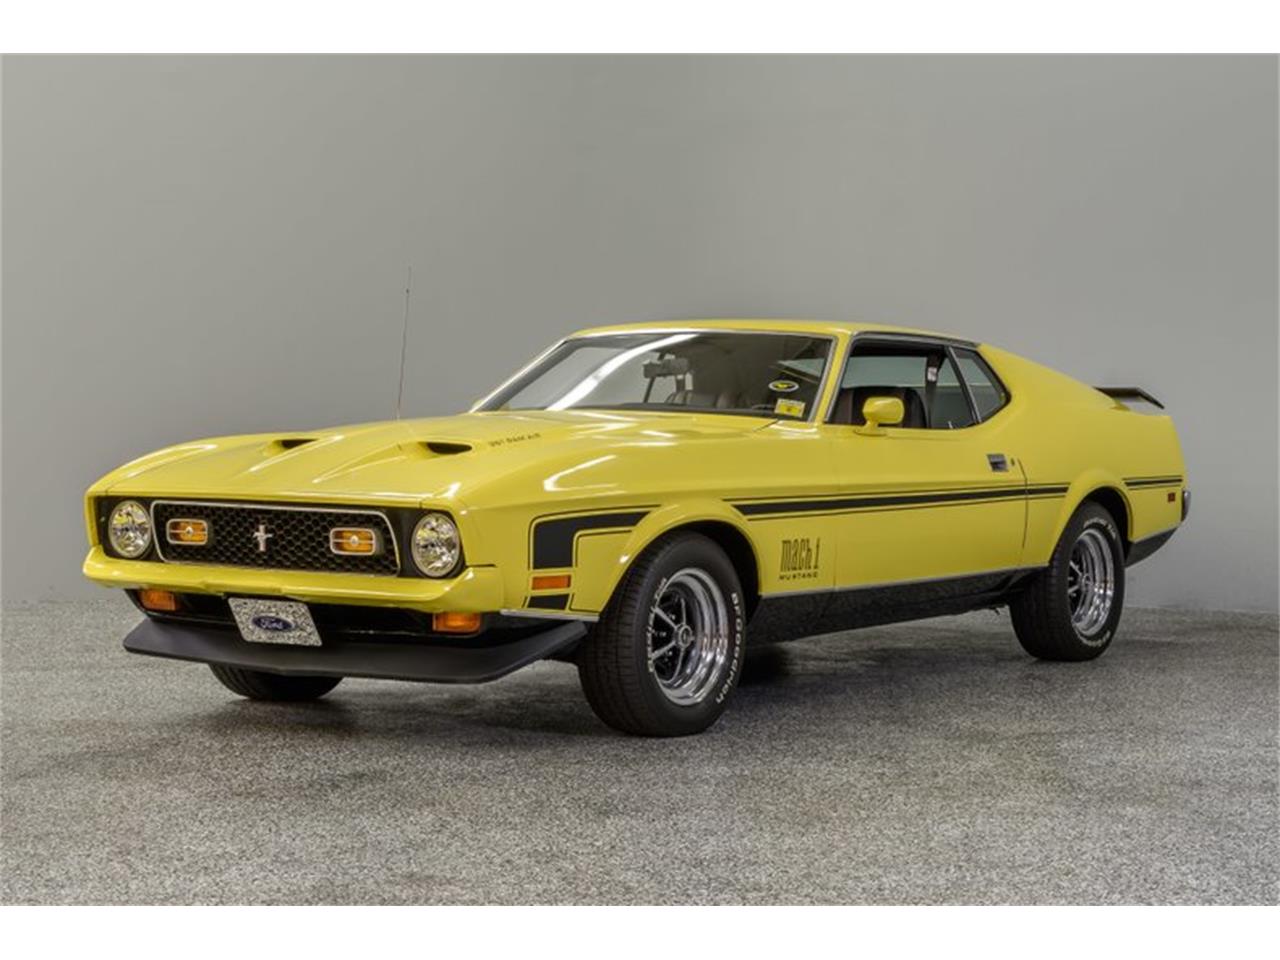 For Sale: 1971 Ford Mustang in Concord, North Carolina.